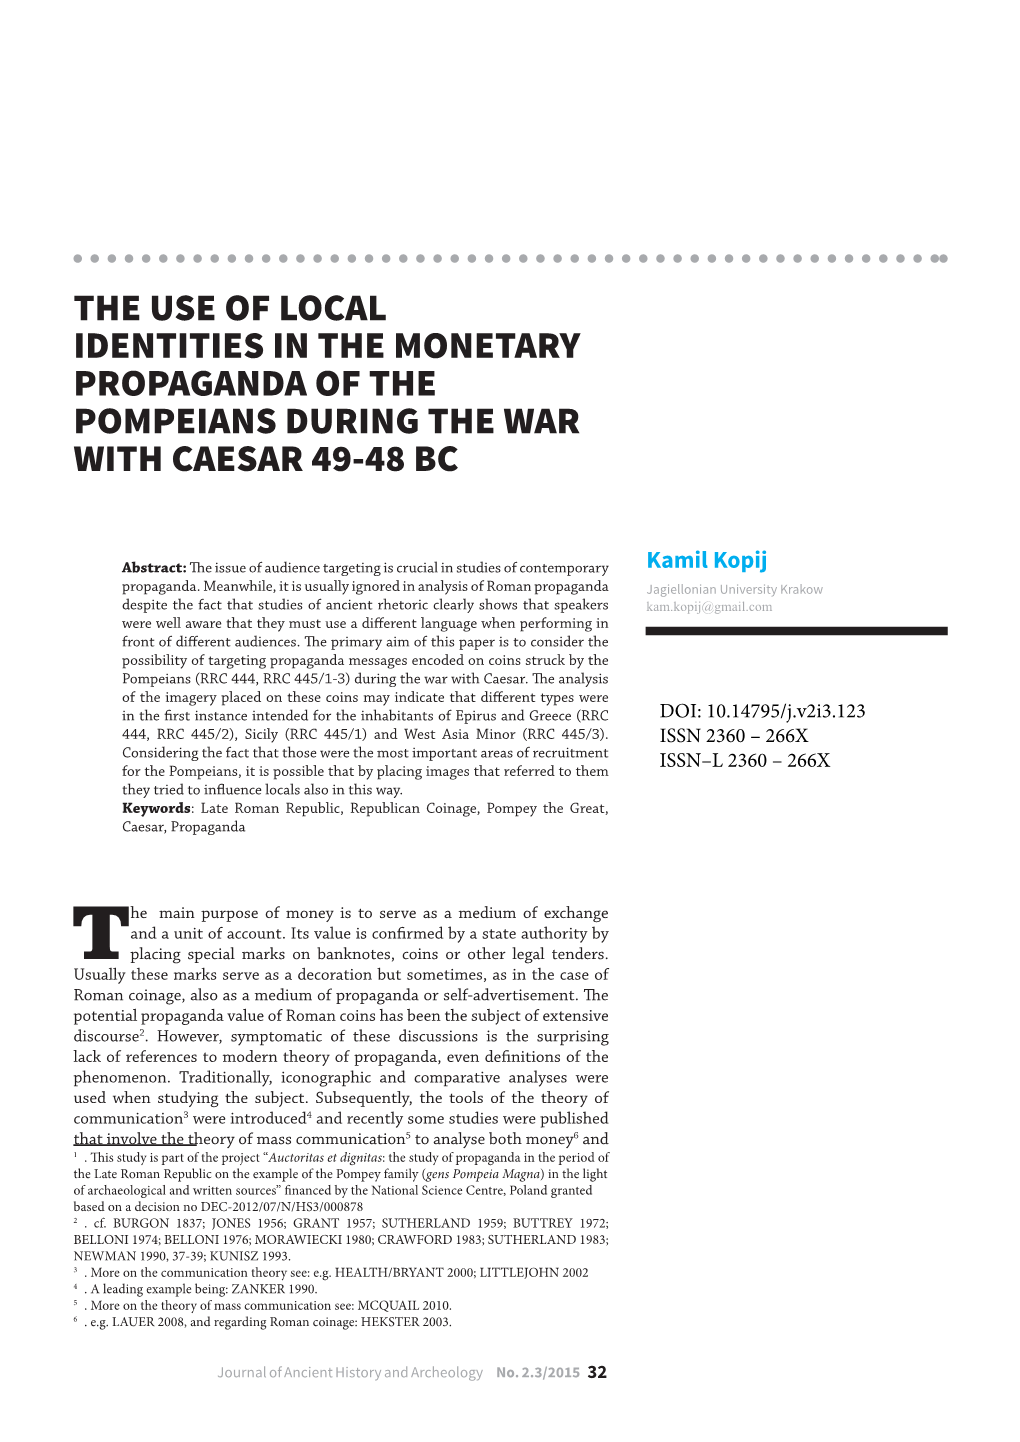 The Use of Local Identities in the Monetary Propaganda of the Pompeians During the War with Caesar 49-48 Bc